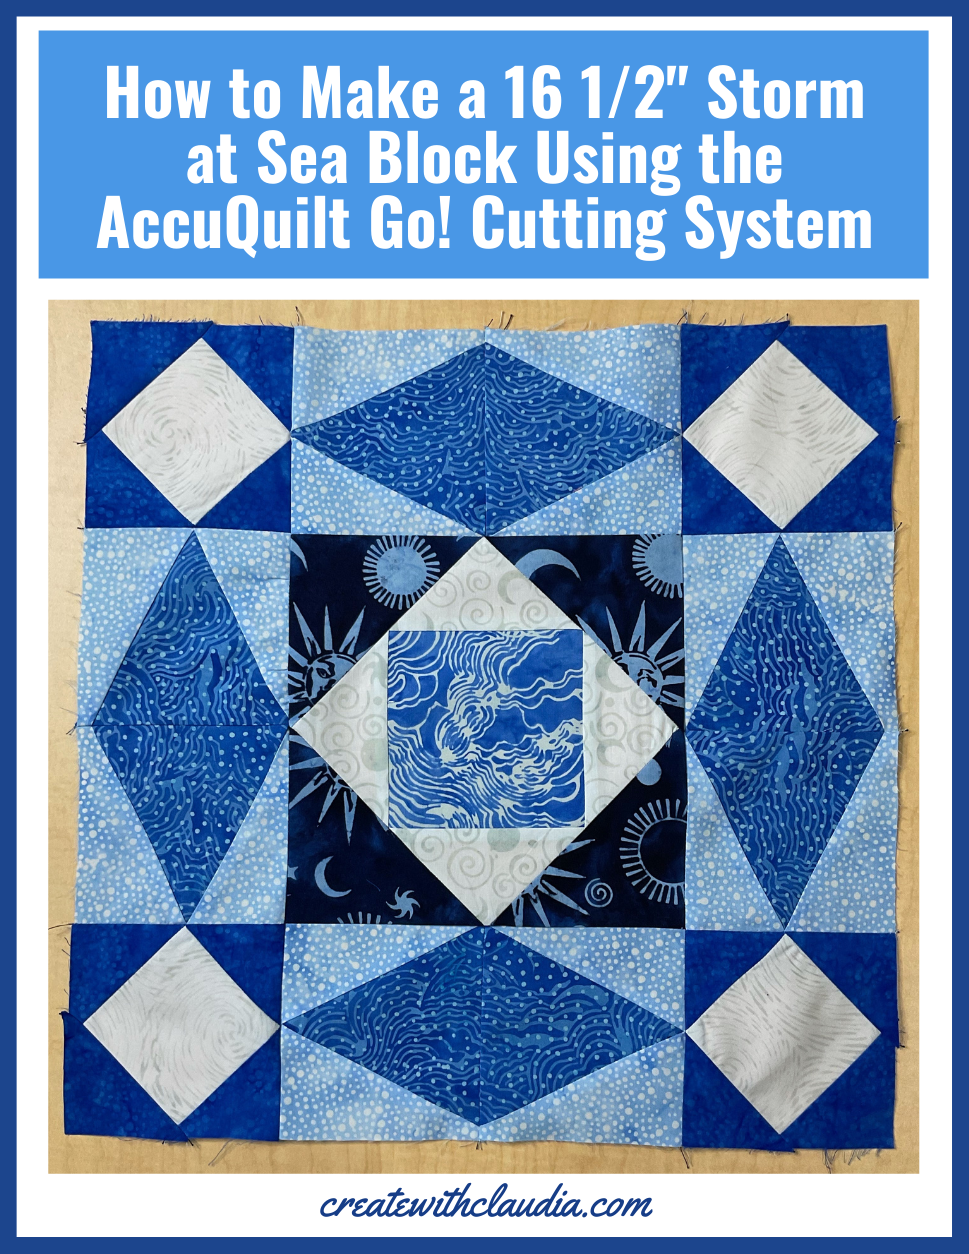  AccuQuilt GO! Square-5 (4 1/2 Finished) Fabric Cutting Die  for Quilting, Sewing, and Crafting DIY Projects